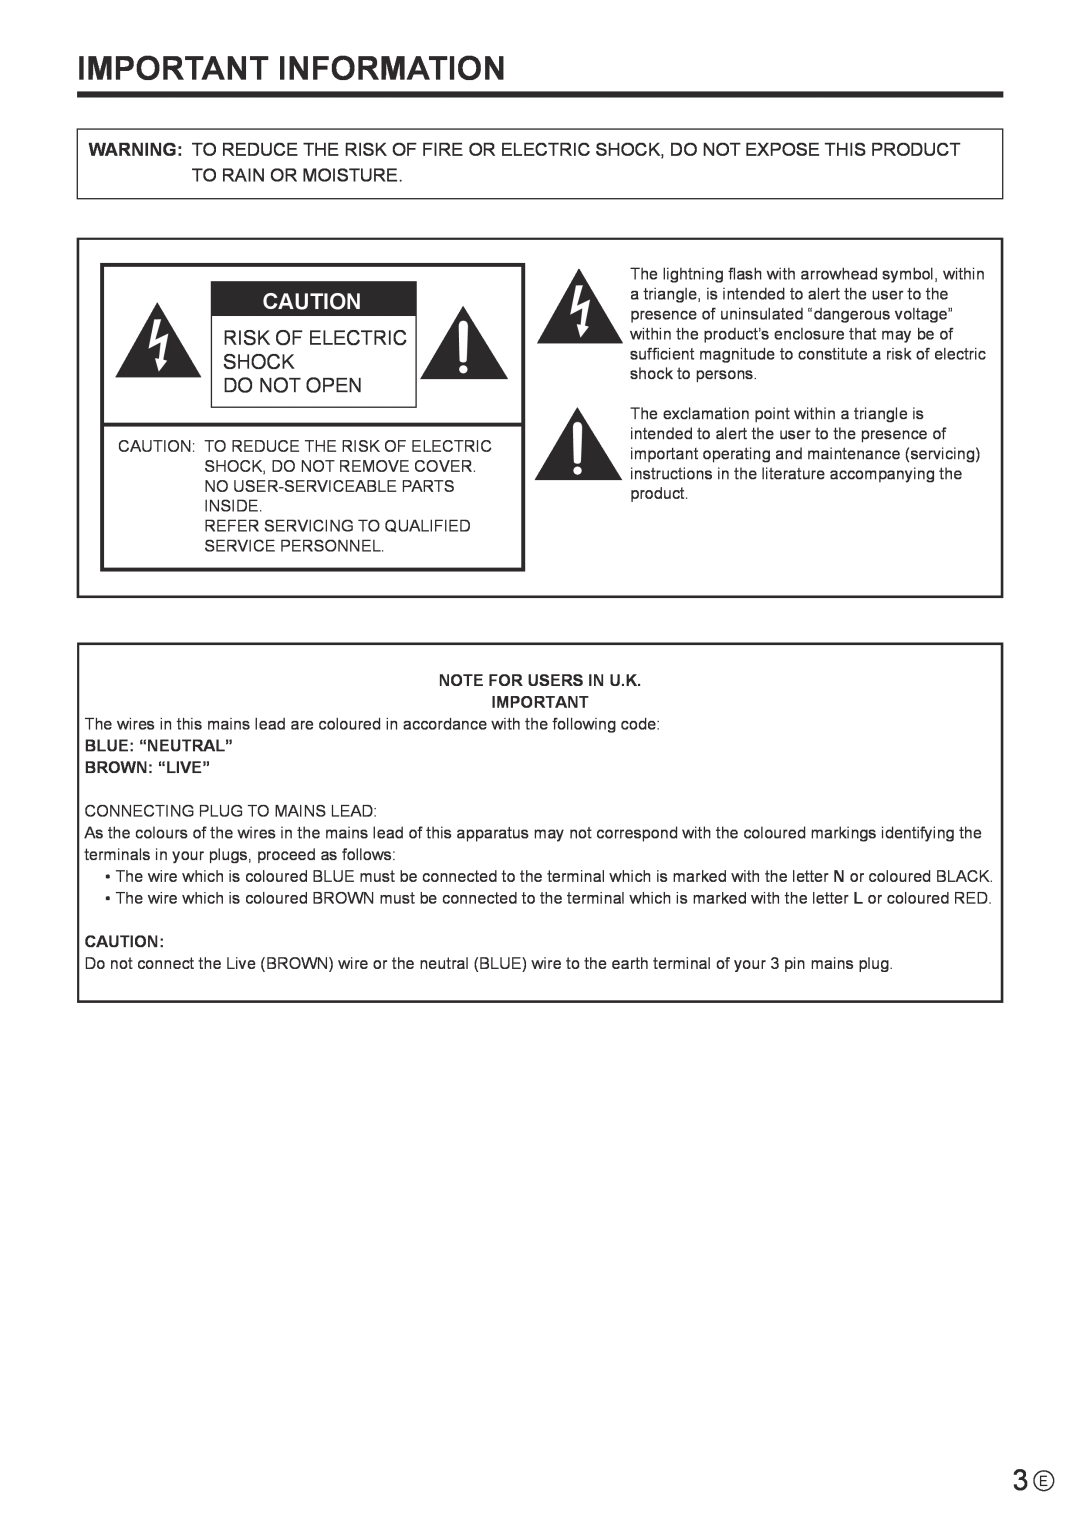 Sharp PN-R703, PN-R603 operation manual Important Information, Risk Of Electric Shock Do Not Open 